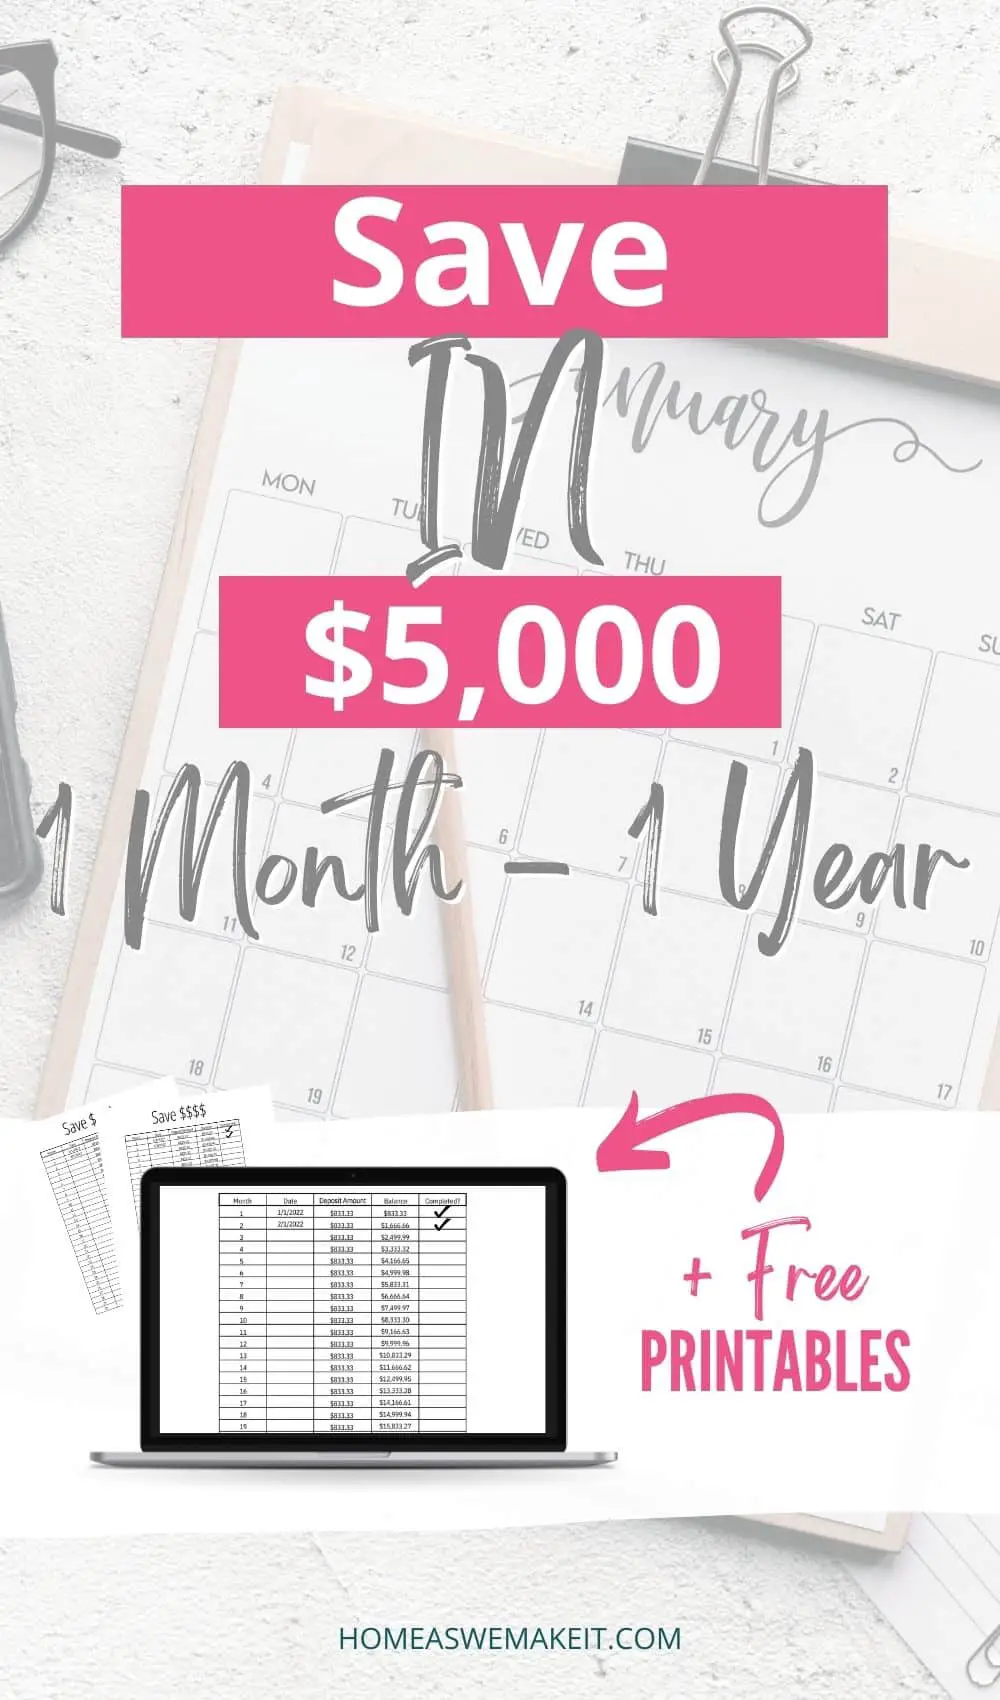 How to Save $5,000 With Saving Charts